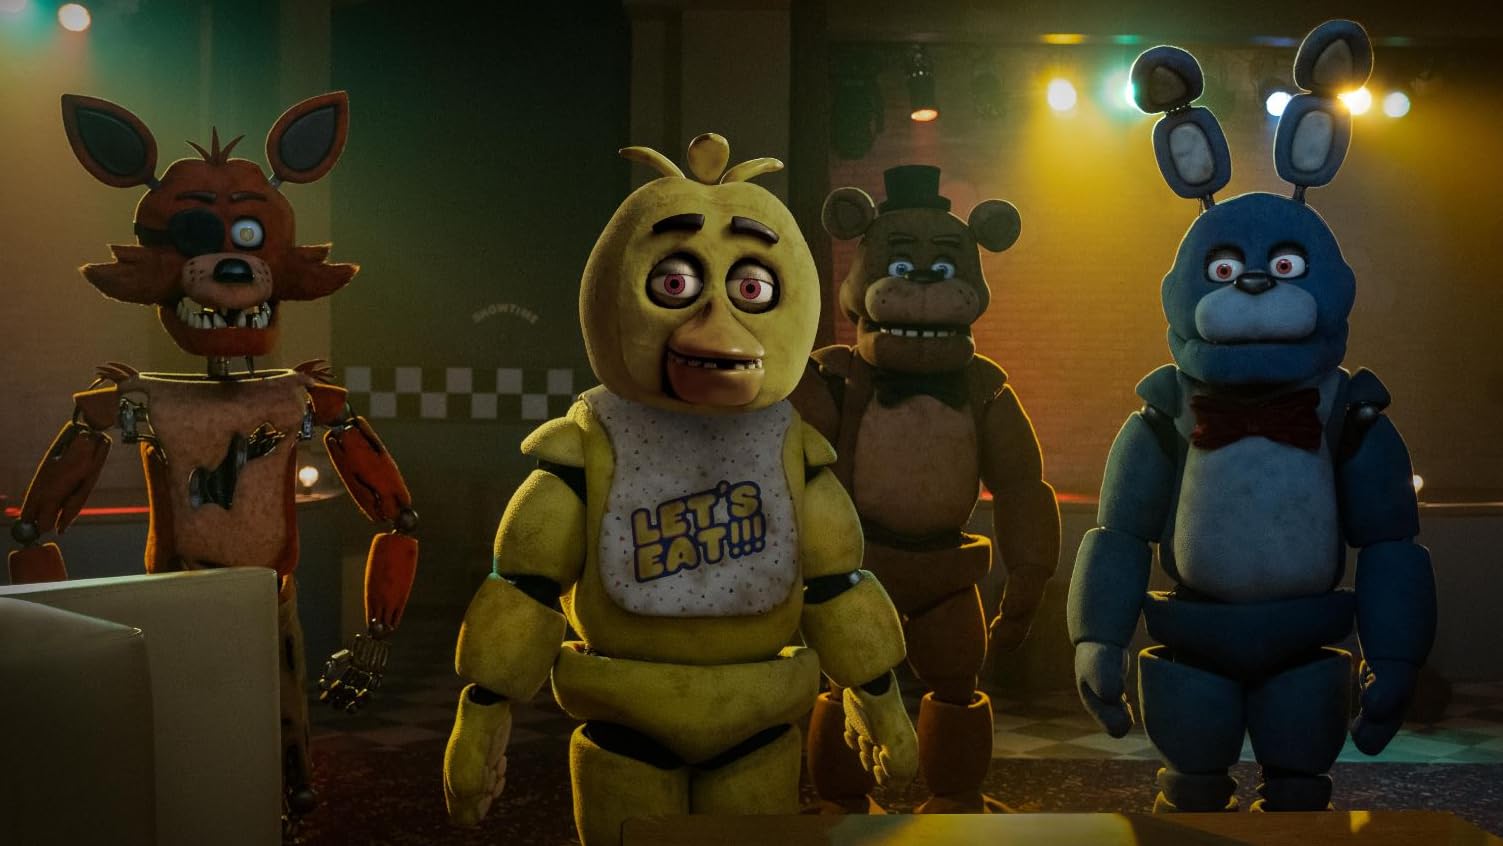 Watch Movie Five Nights at Freddy’s (2023) Full Free Online Full HD